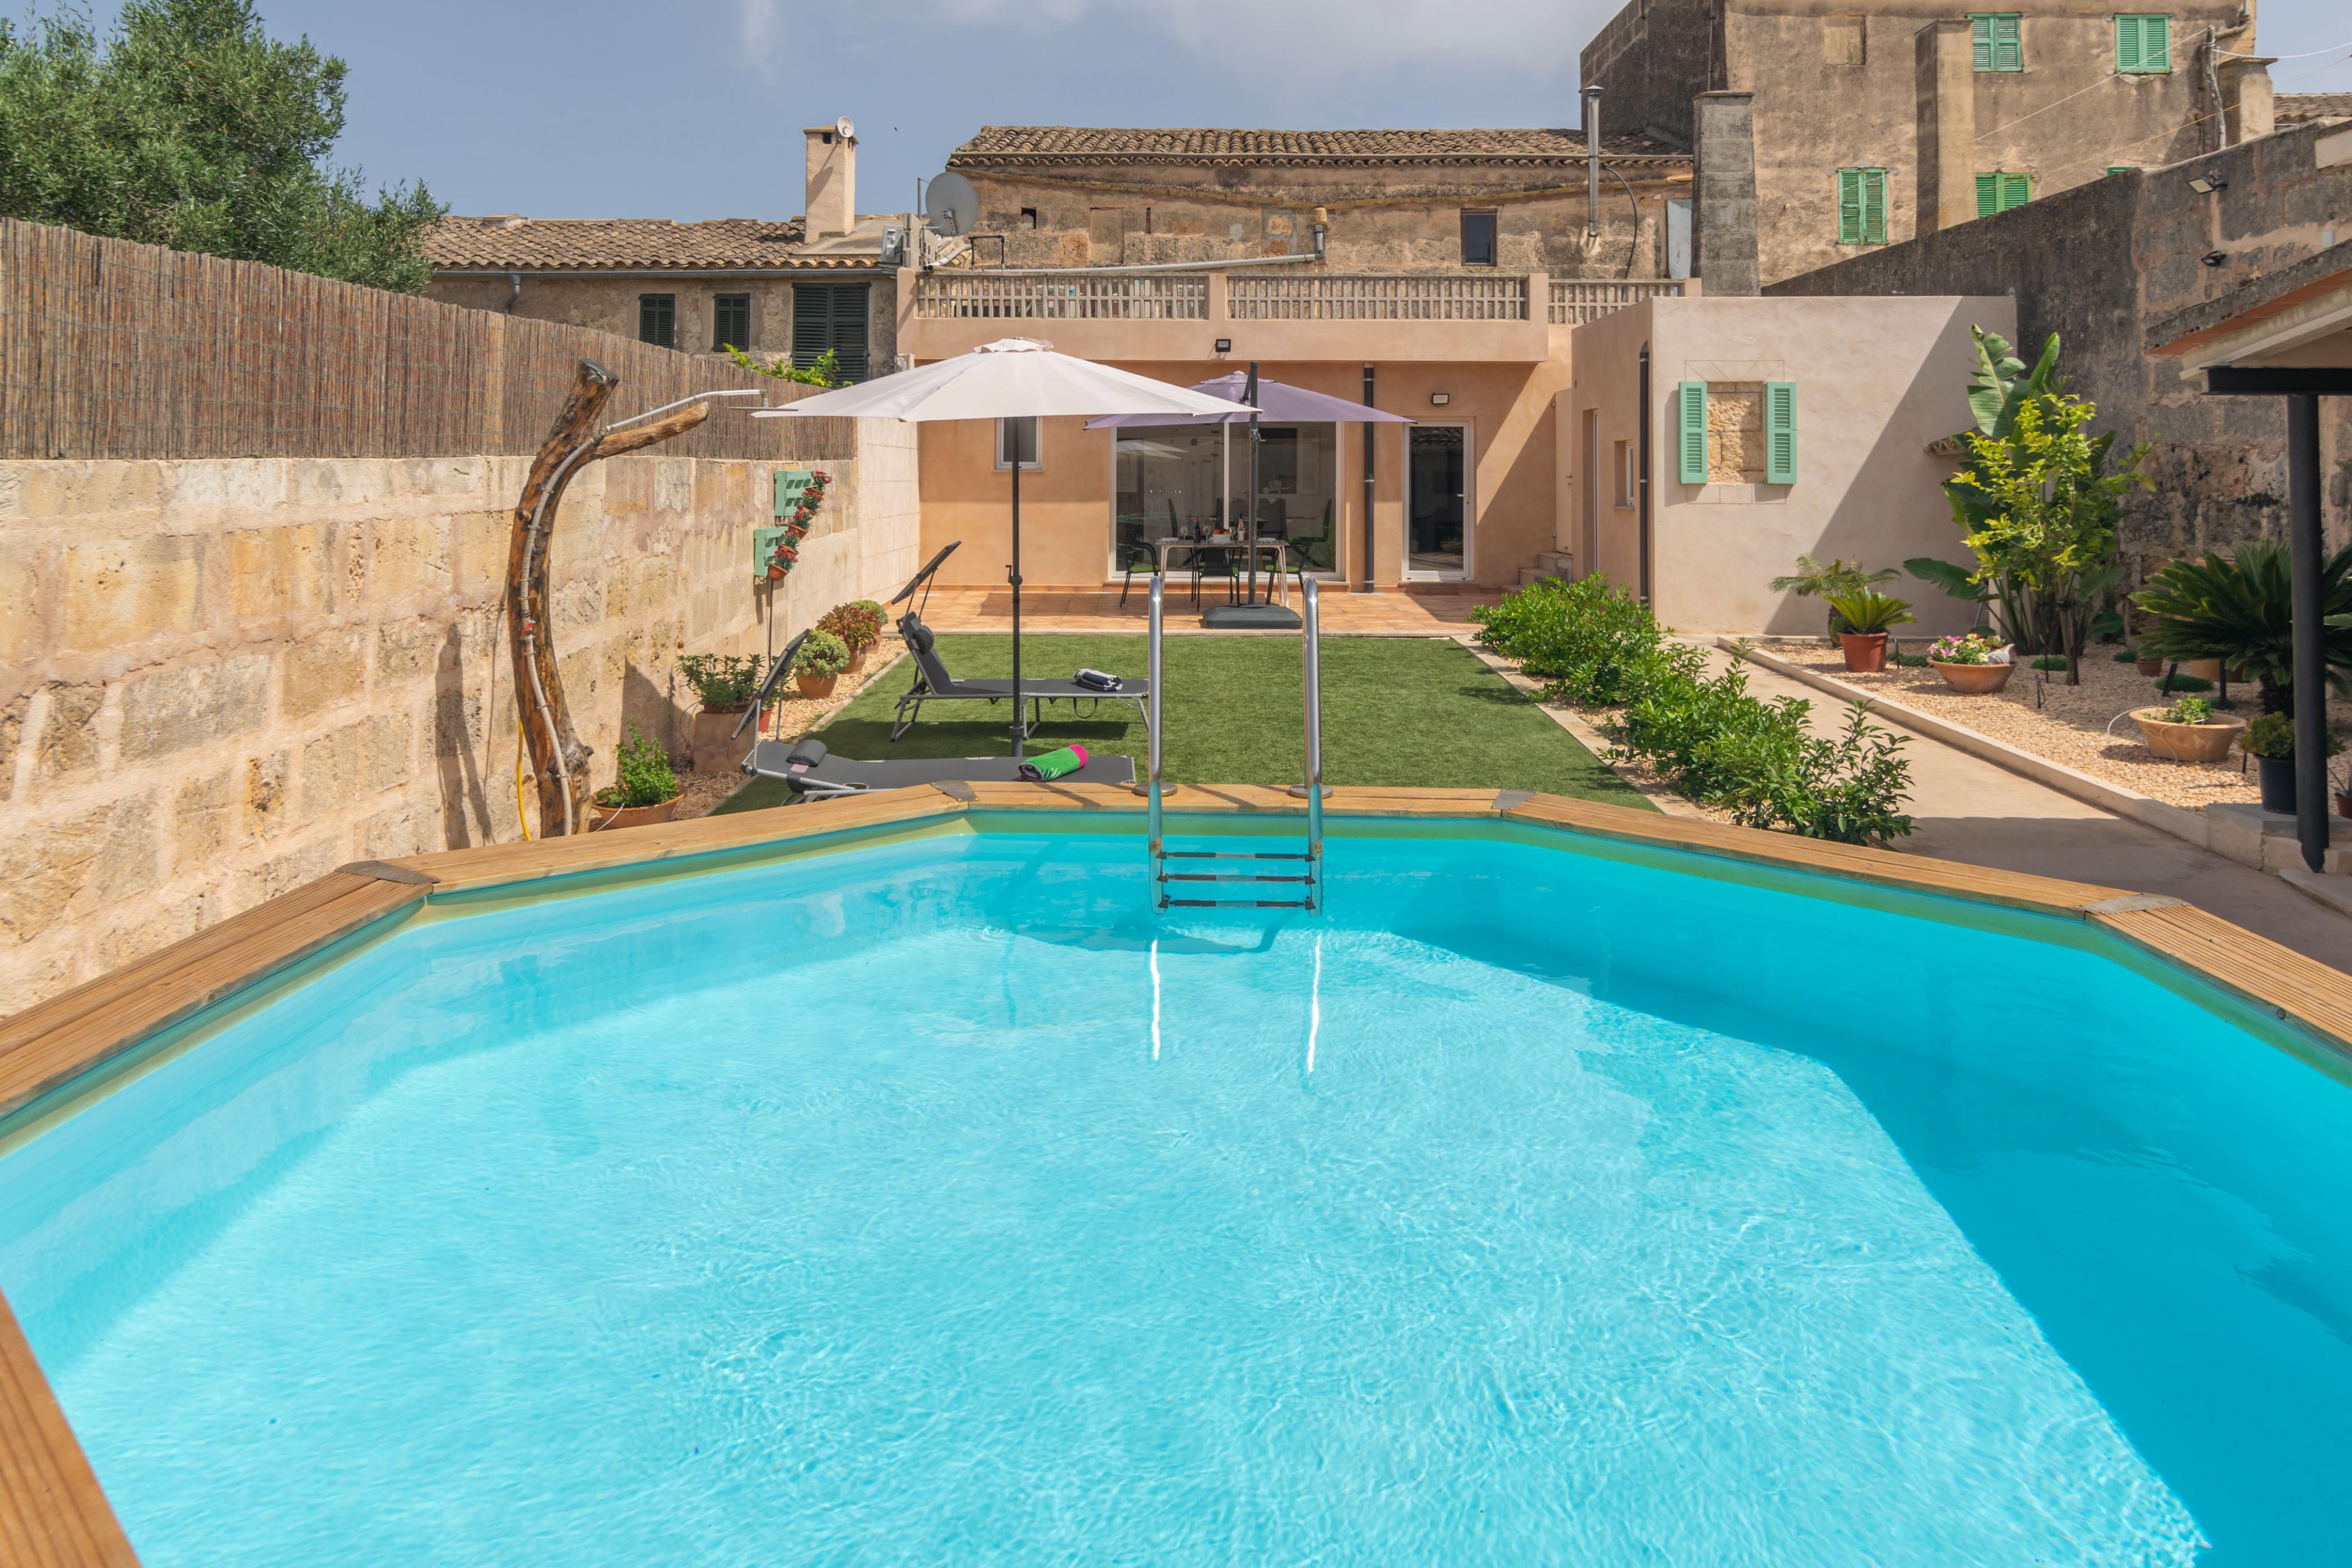 Property Image 1 - CAS PADRI PEP - Charming town house with private above ground pool. Free WIFI.